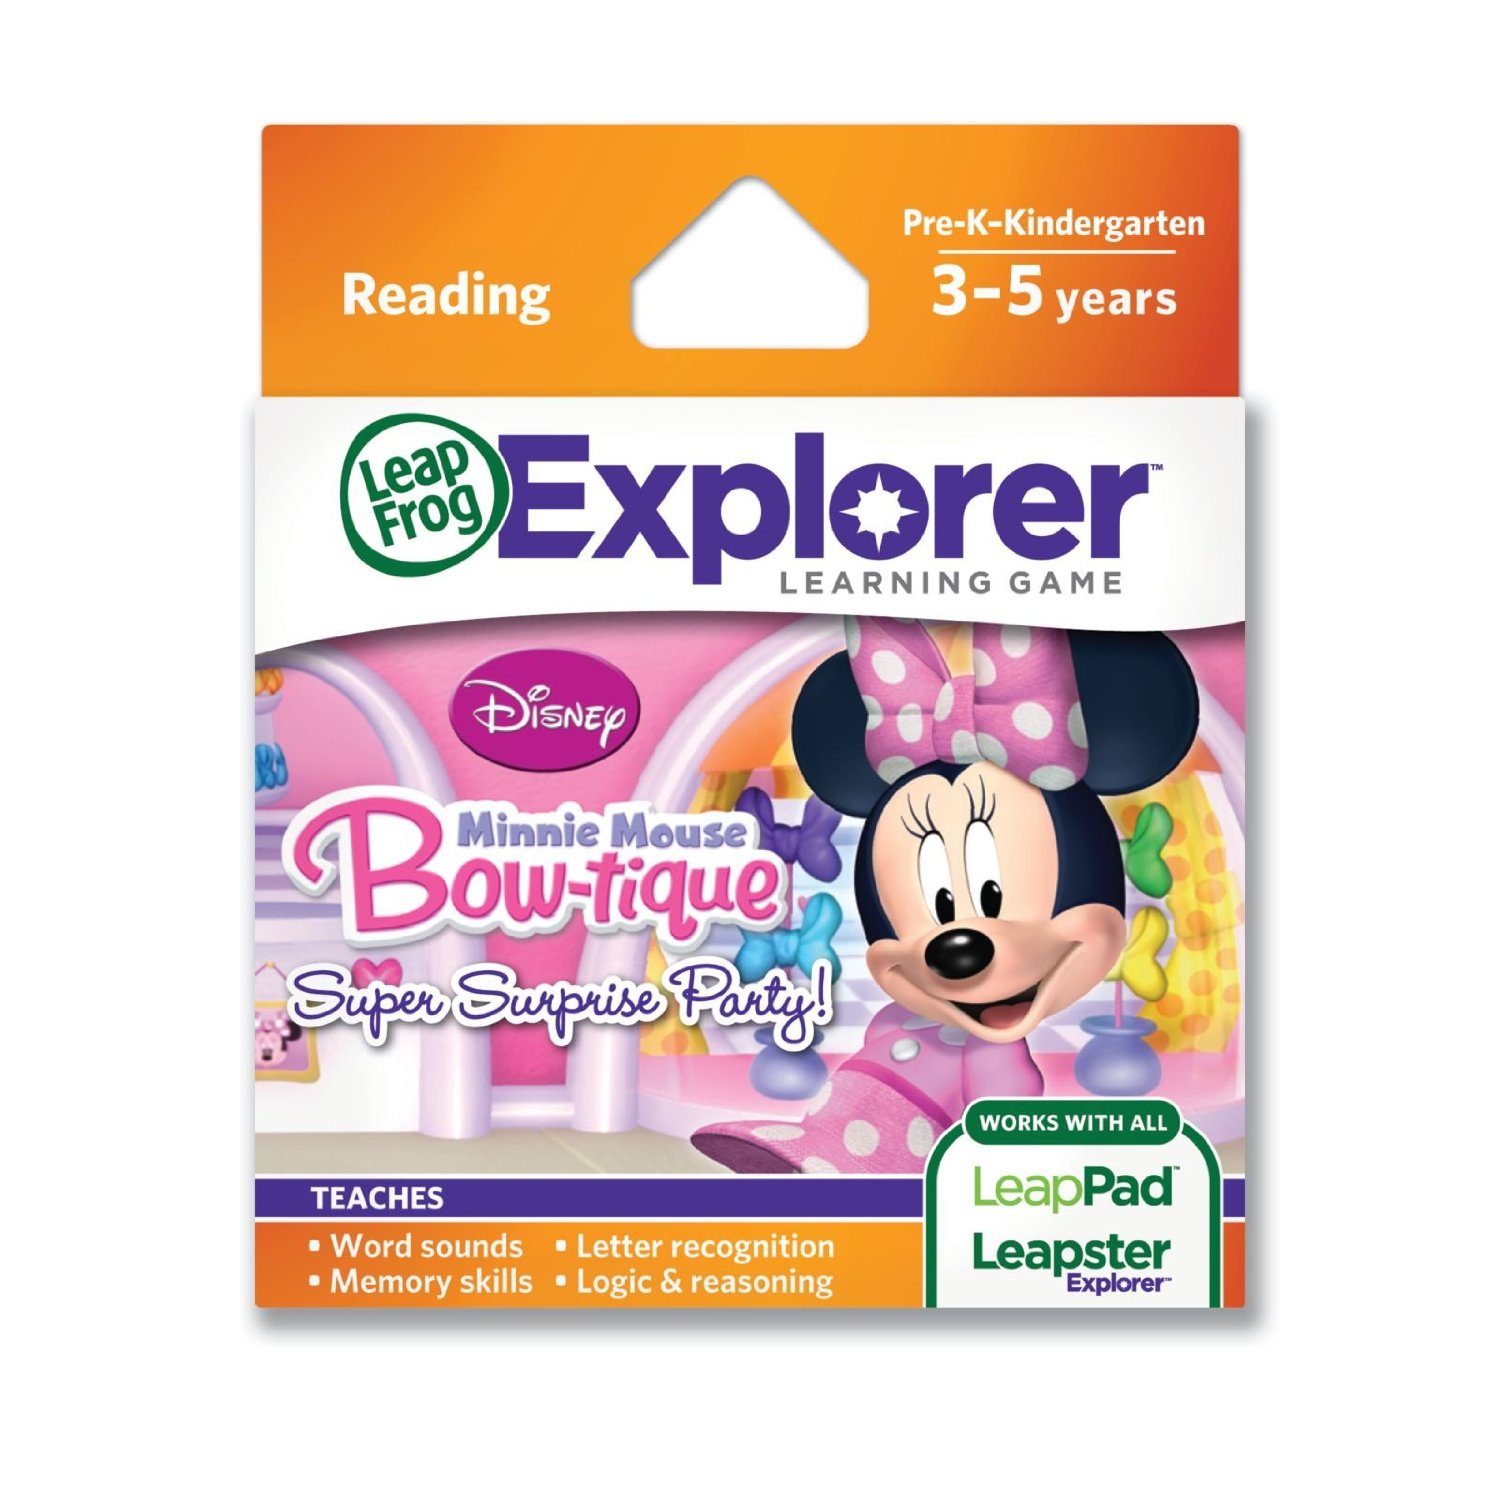 Minnie’s Bow-tique Super Surprise Party Learning Game Only $14.05 – 44% Savings